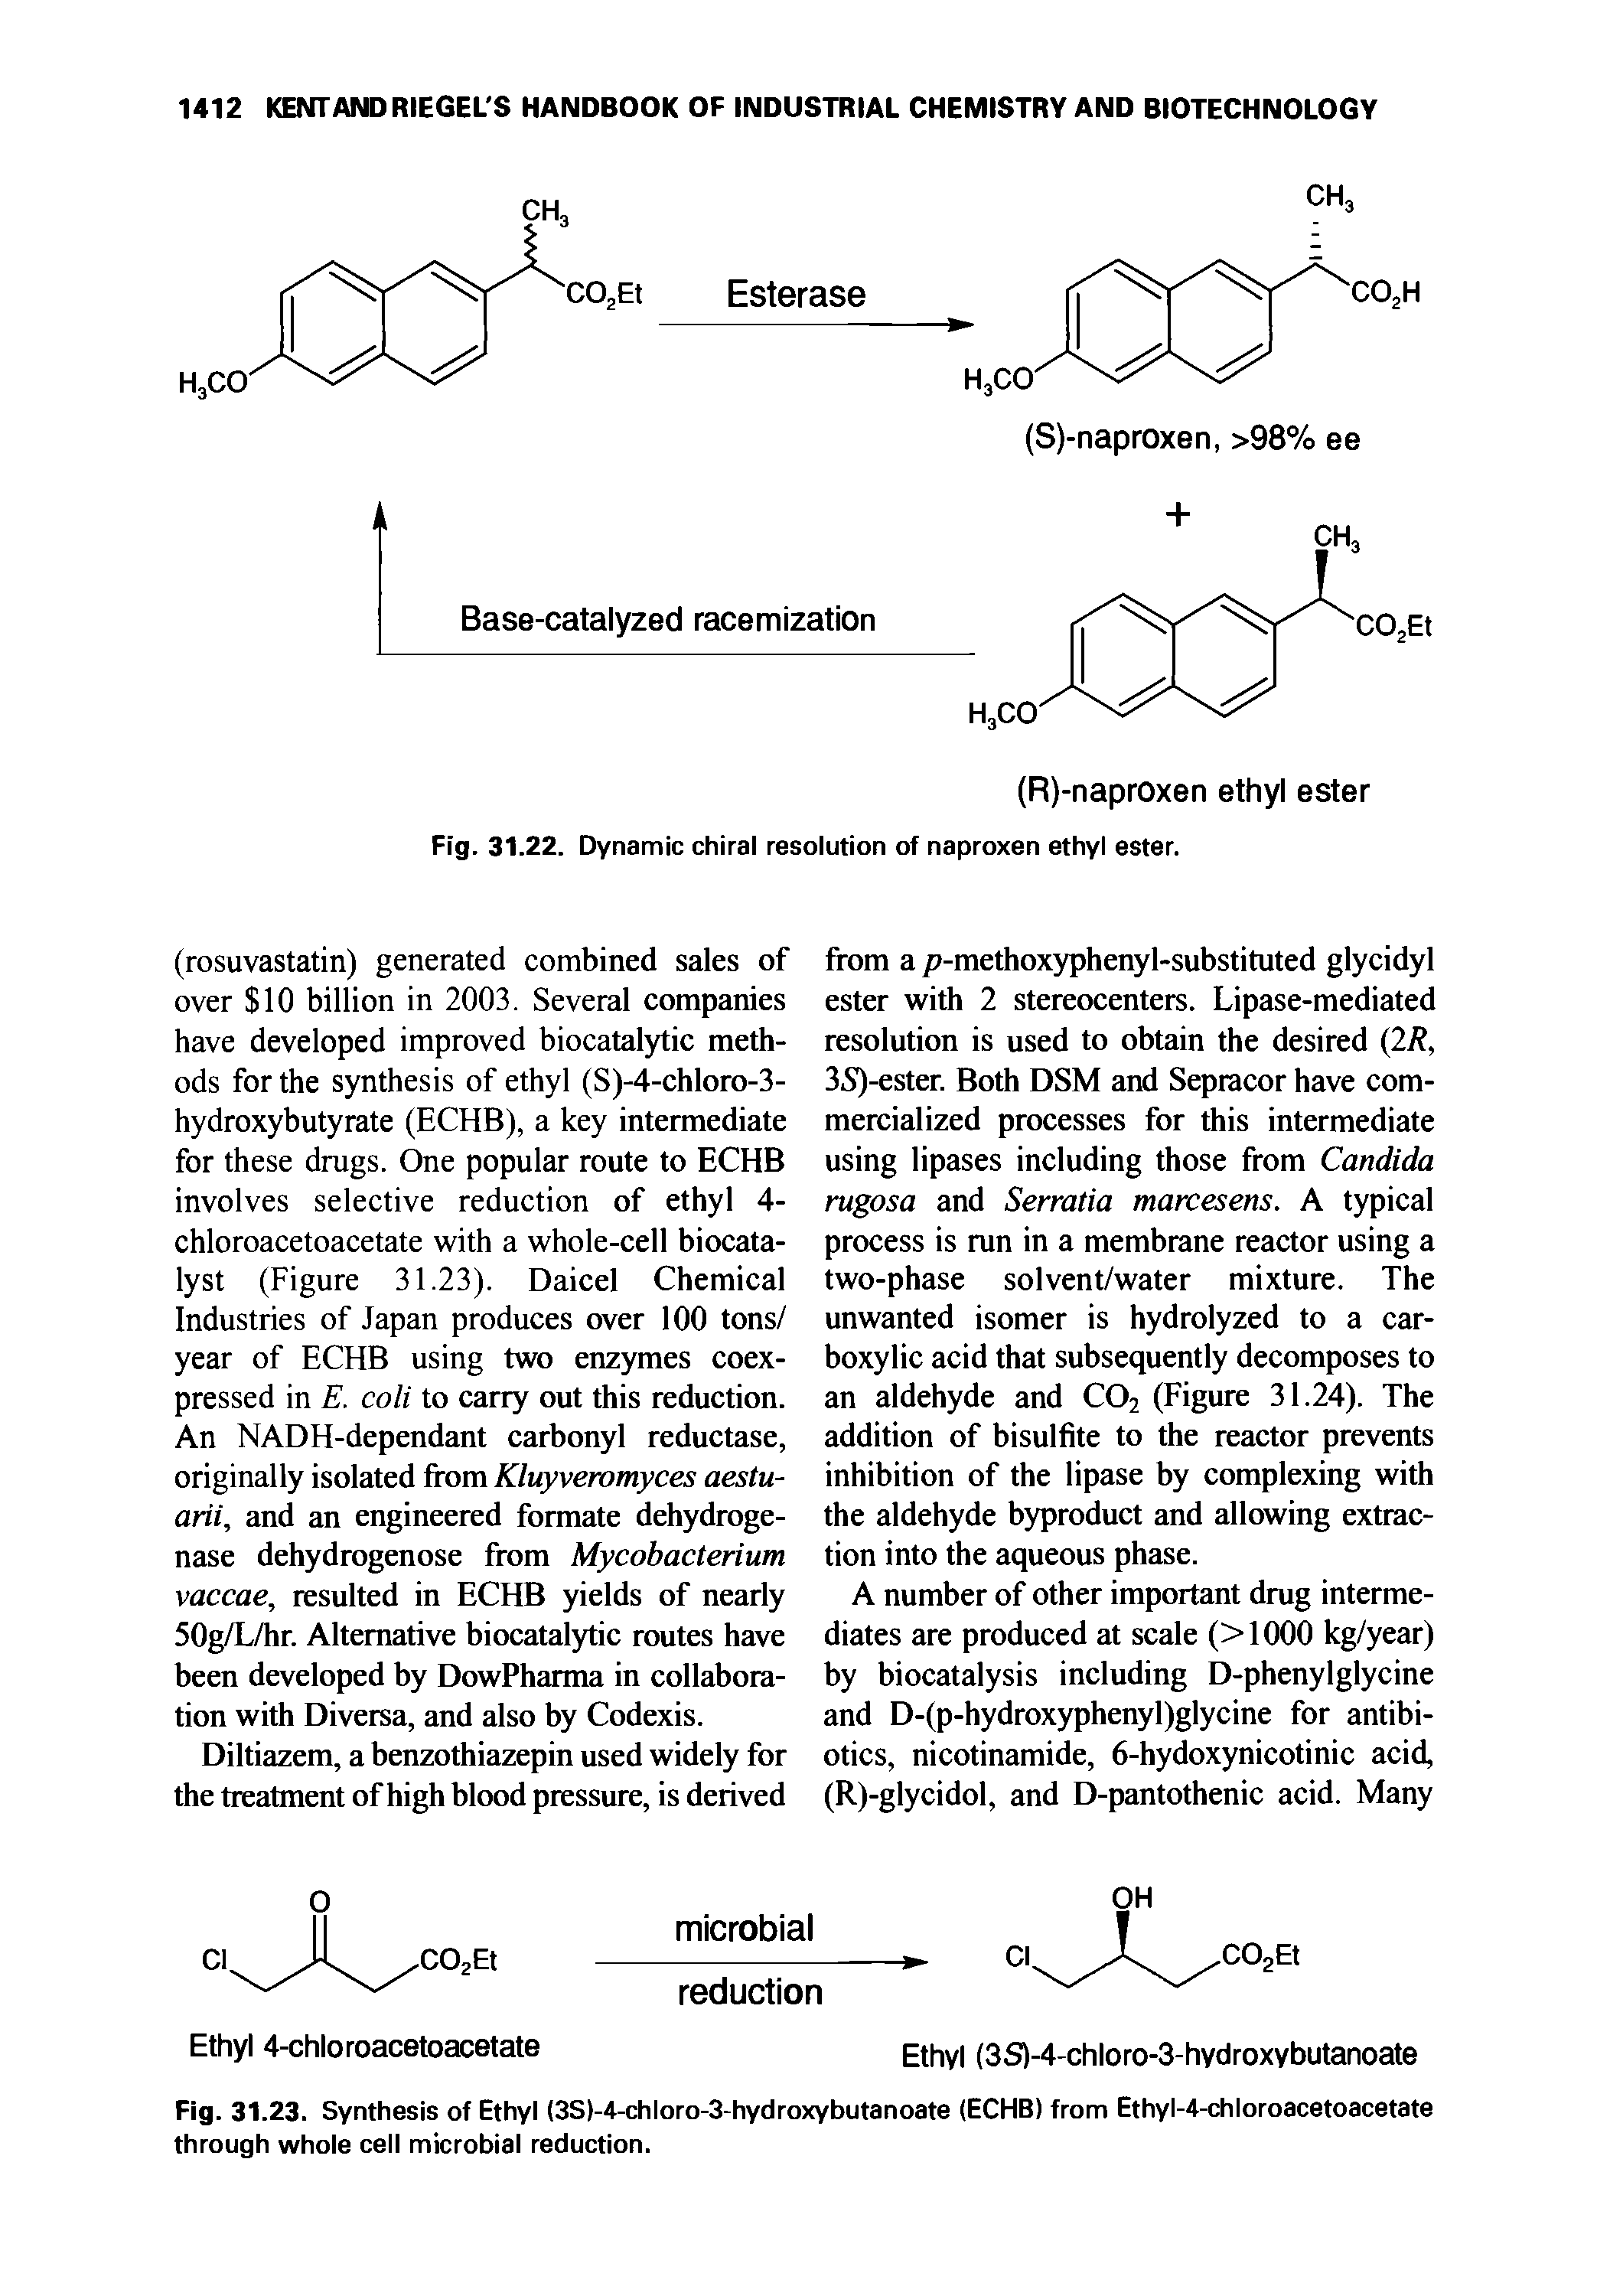 Fig. 31.23. Synthesis of Ethyl (3S)-4-chloro-3-hydroxybutanoate (ECHB) from Ethyl-4-chloroacetoacetate through whole cell microbial reduction.